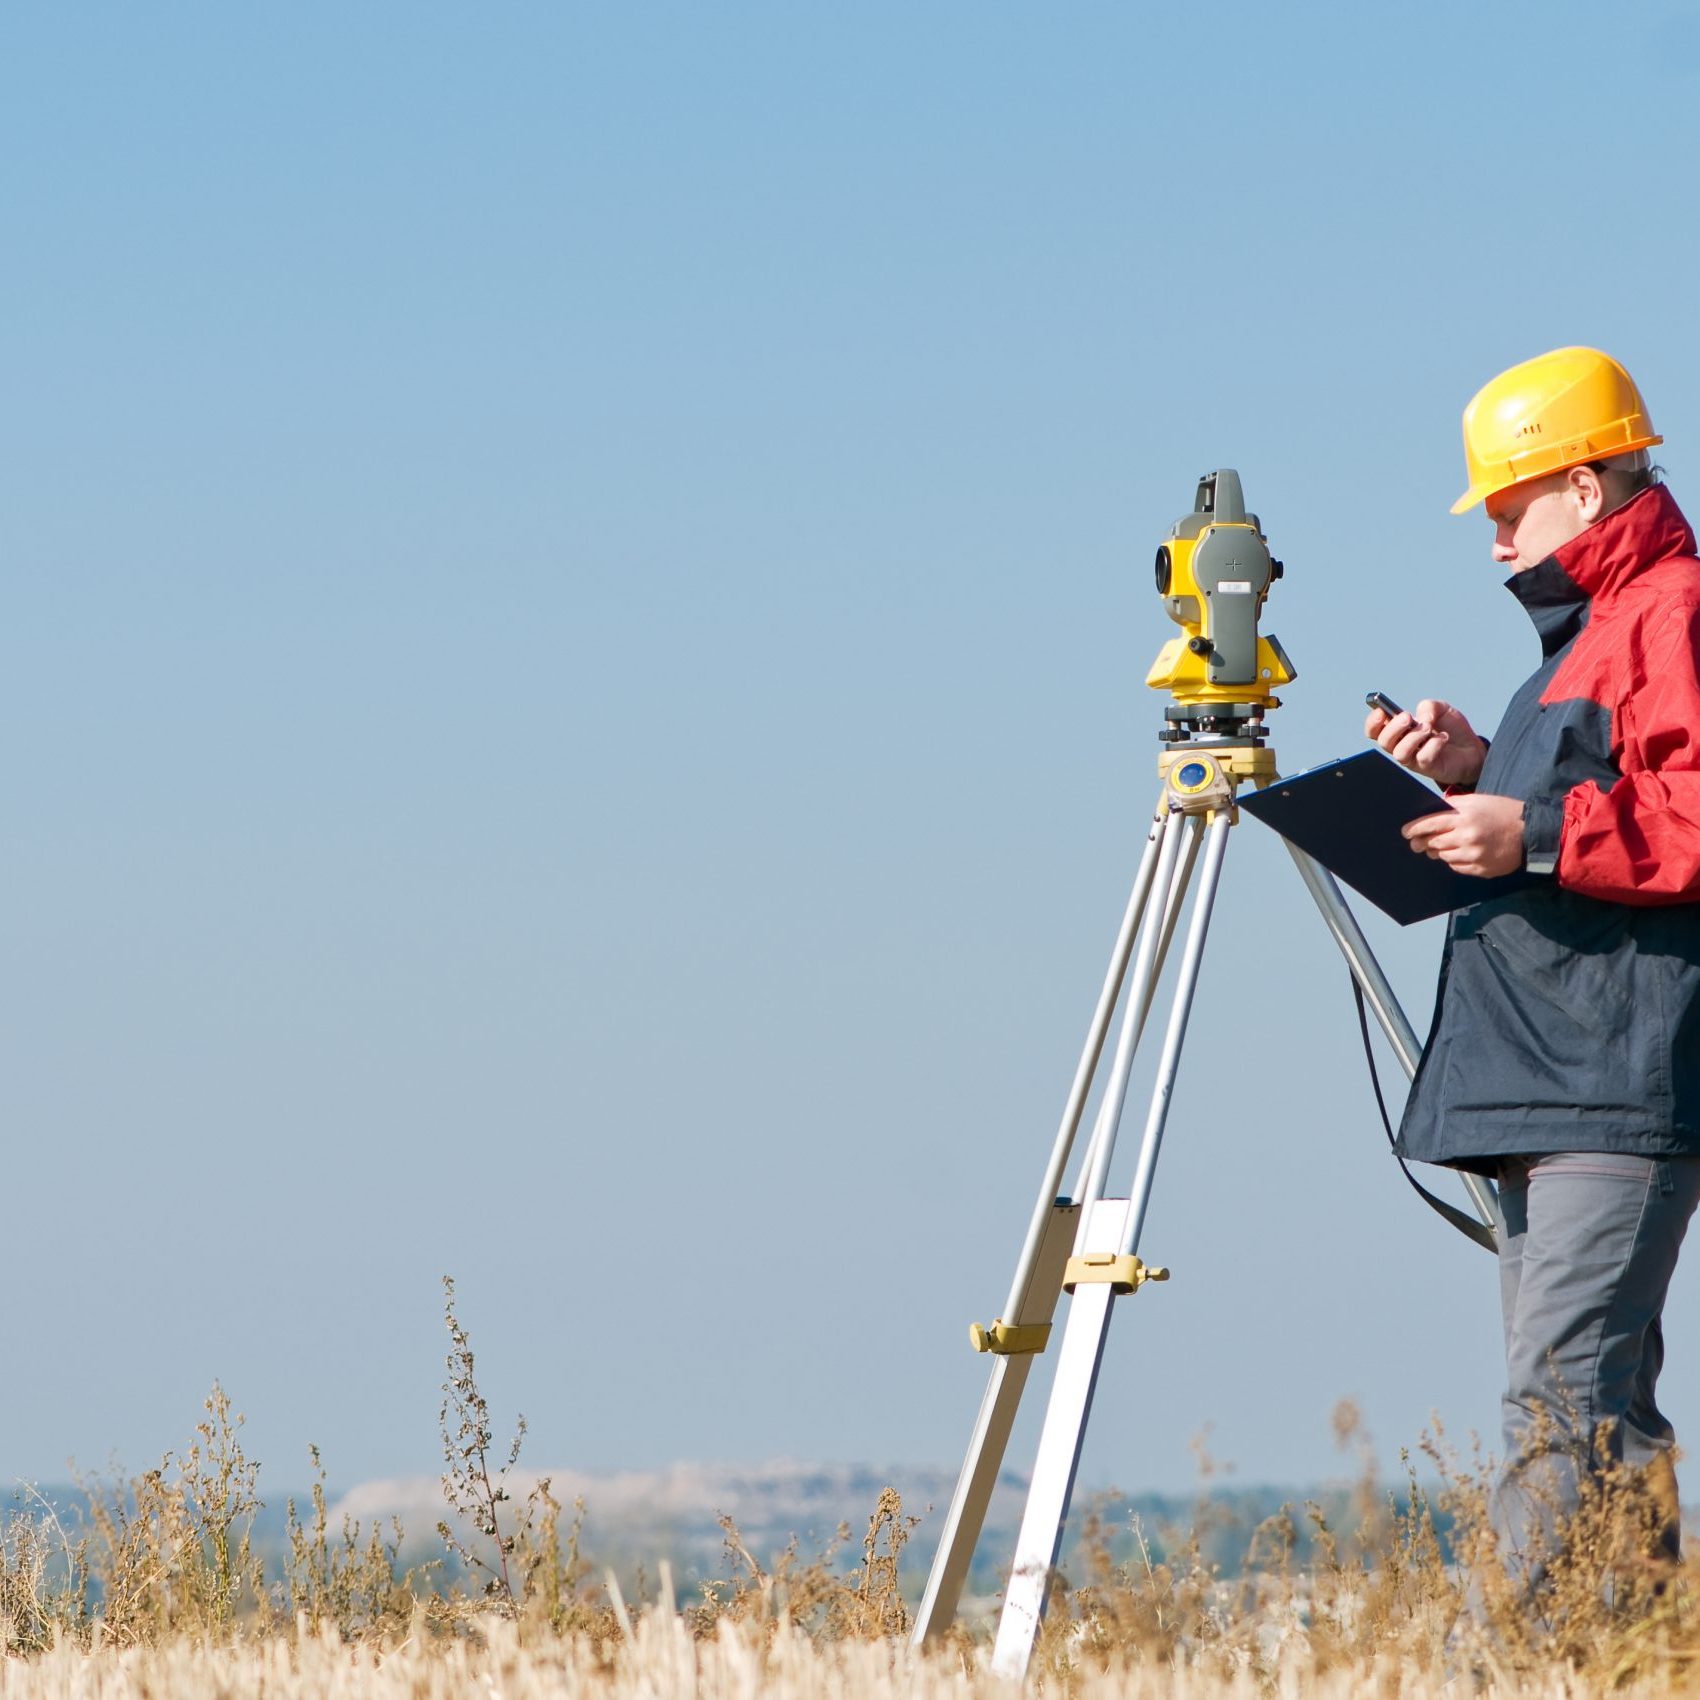 Surveyor worker making measurement in a field with theodolite total station equipment